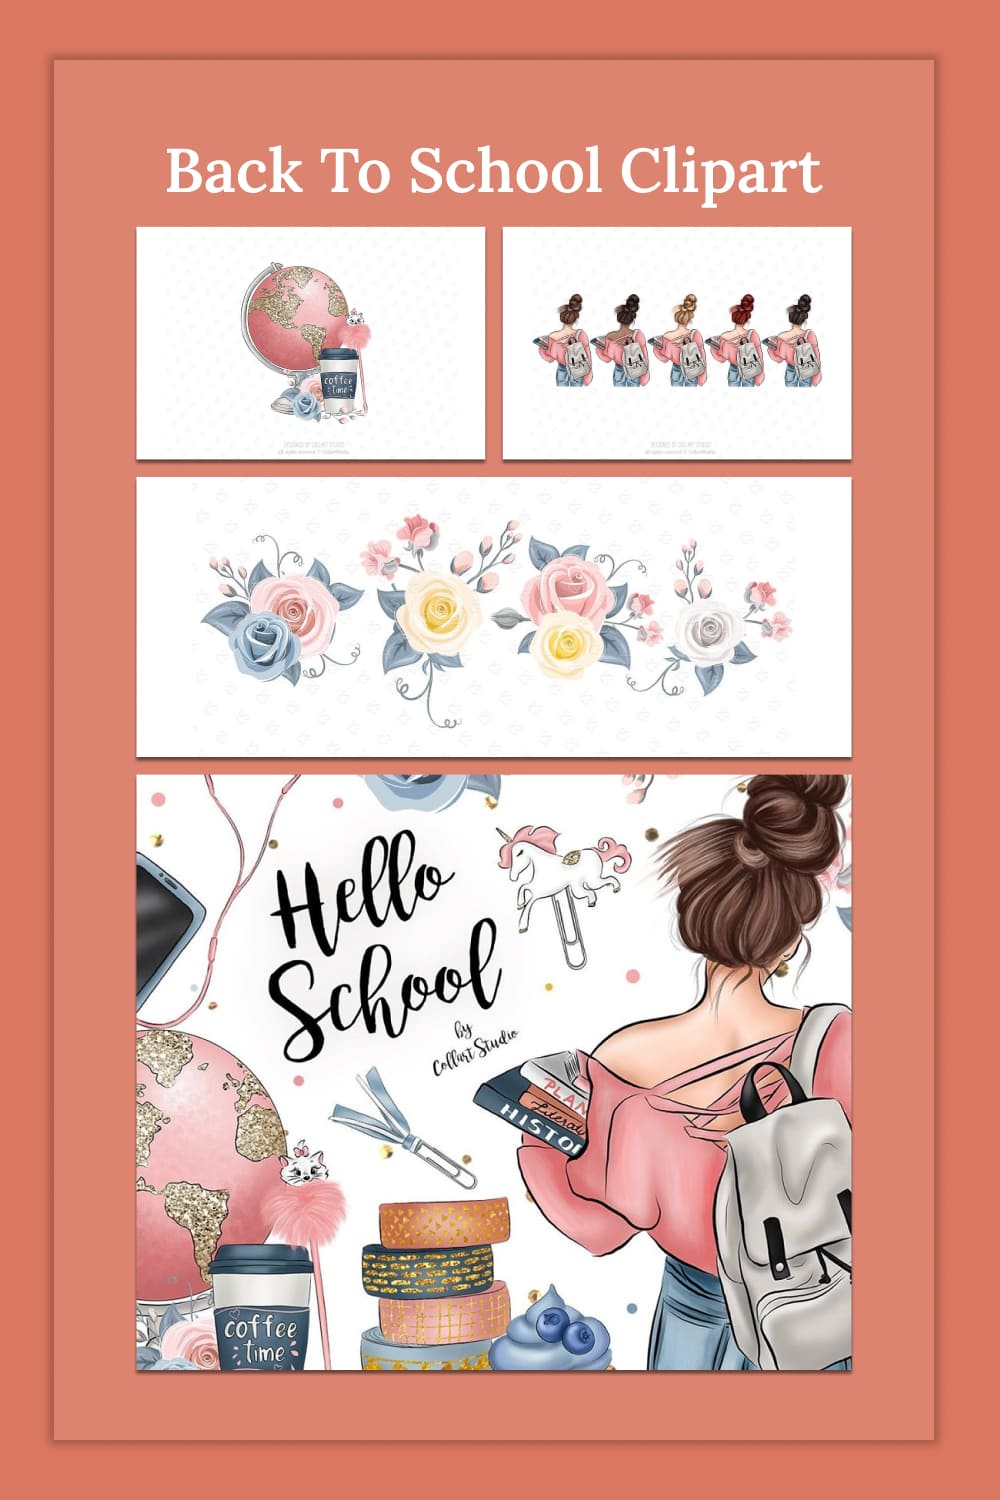 Back to school clipart fashion - pinterest image preview.